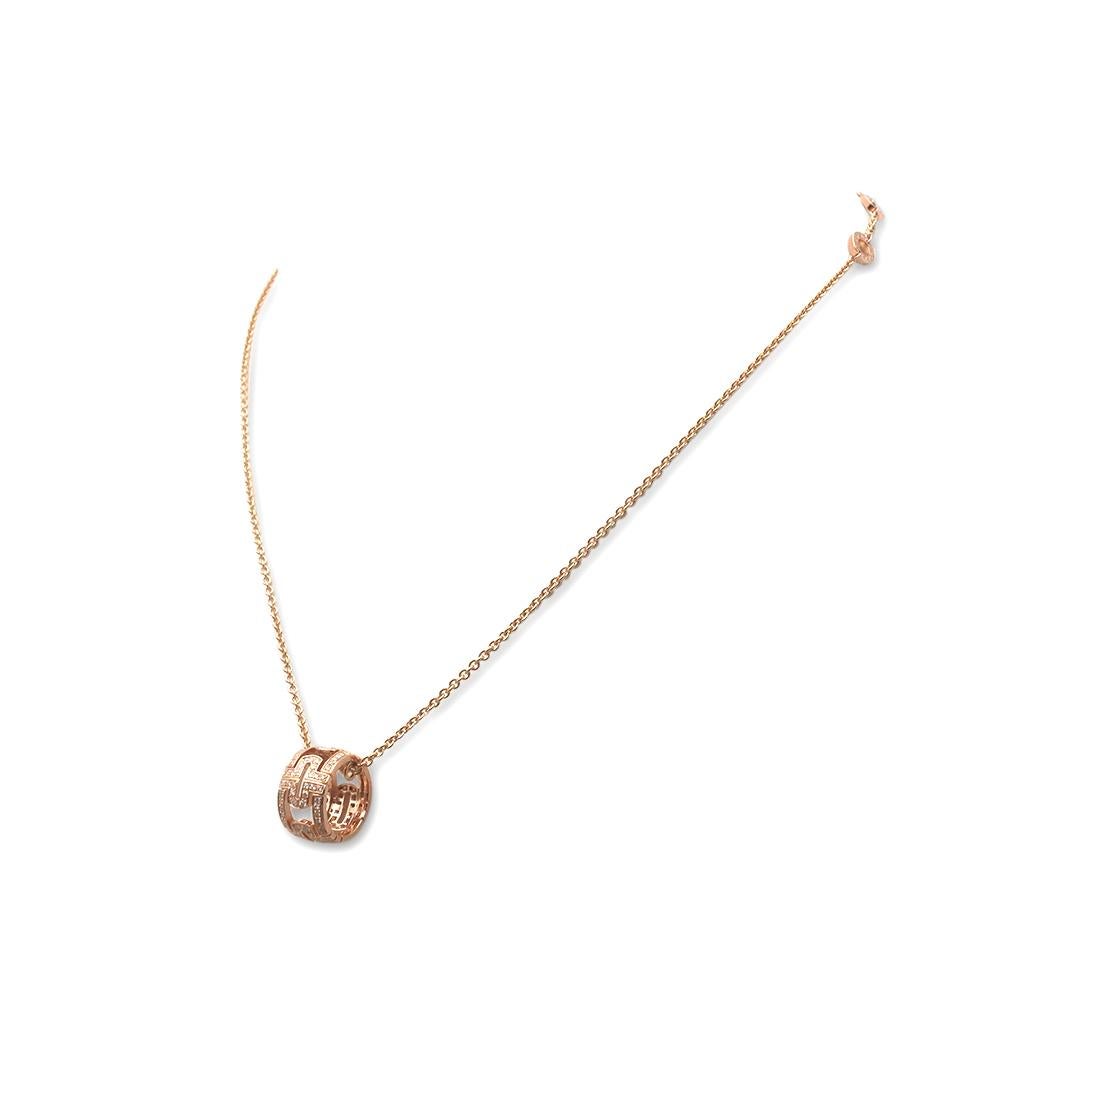 Authentic Bvlgari 'Parentesi' necklace crafted in 18 karat rose gold. The pendant is inspired by Rome's architecture and set with an array of round brilliant cut diamonds weighing an estimated 0.70 carats (G-H color, VS Clarity). The necklace is